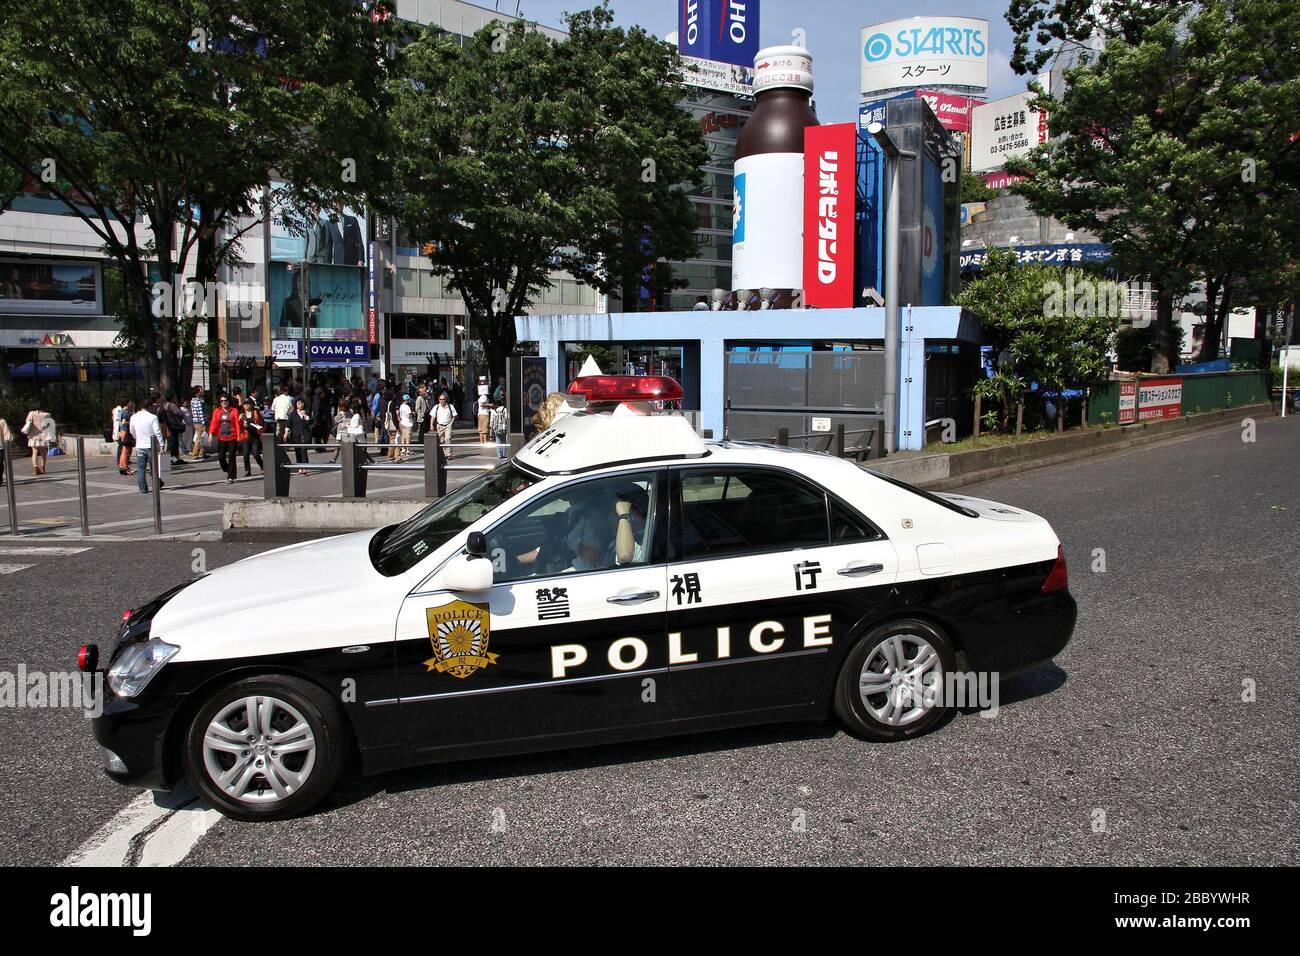 TOKYO, JAPAN - MAY 11, 2012: Police car in Shibuya Ward, Tokyo. There are some 289,000 police officers in Japan. Stock Photo